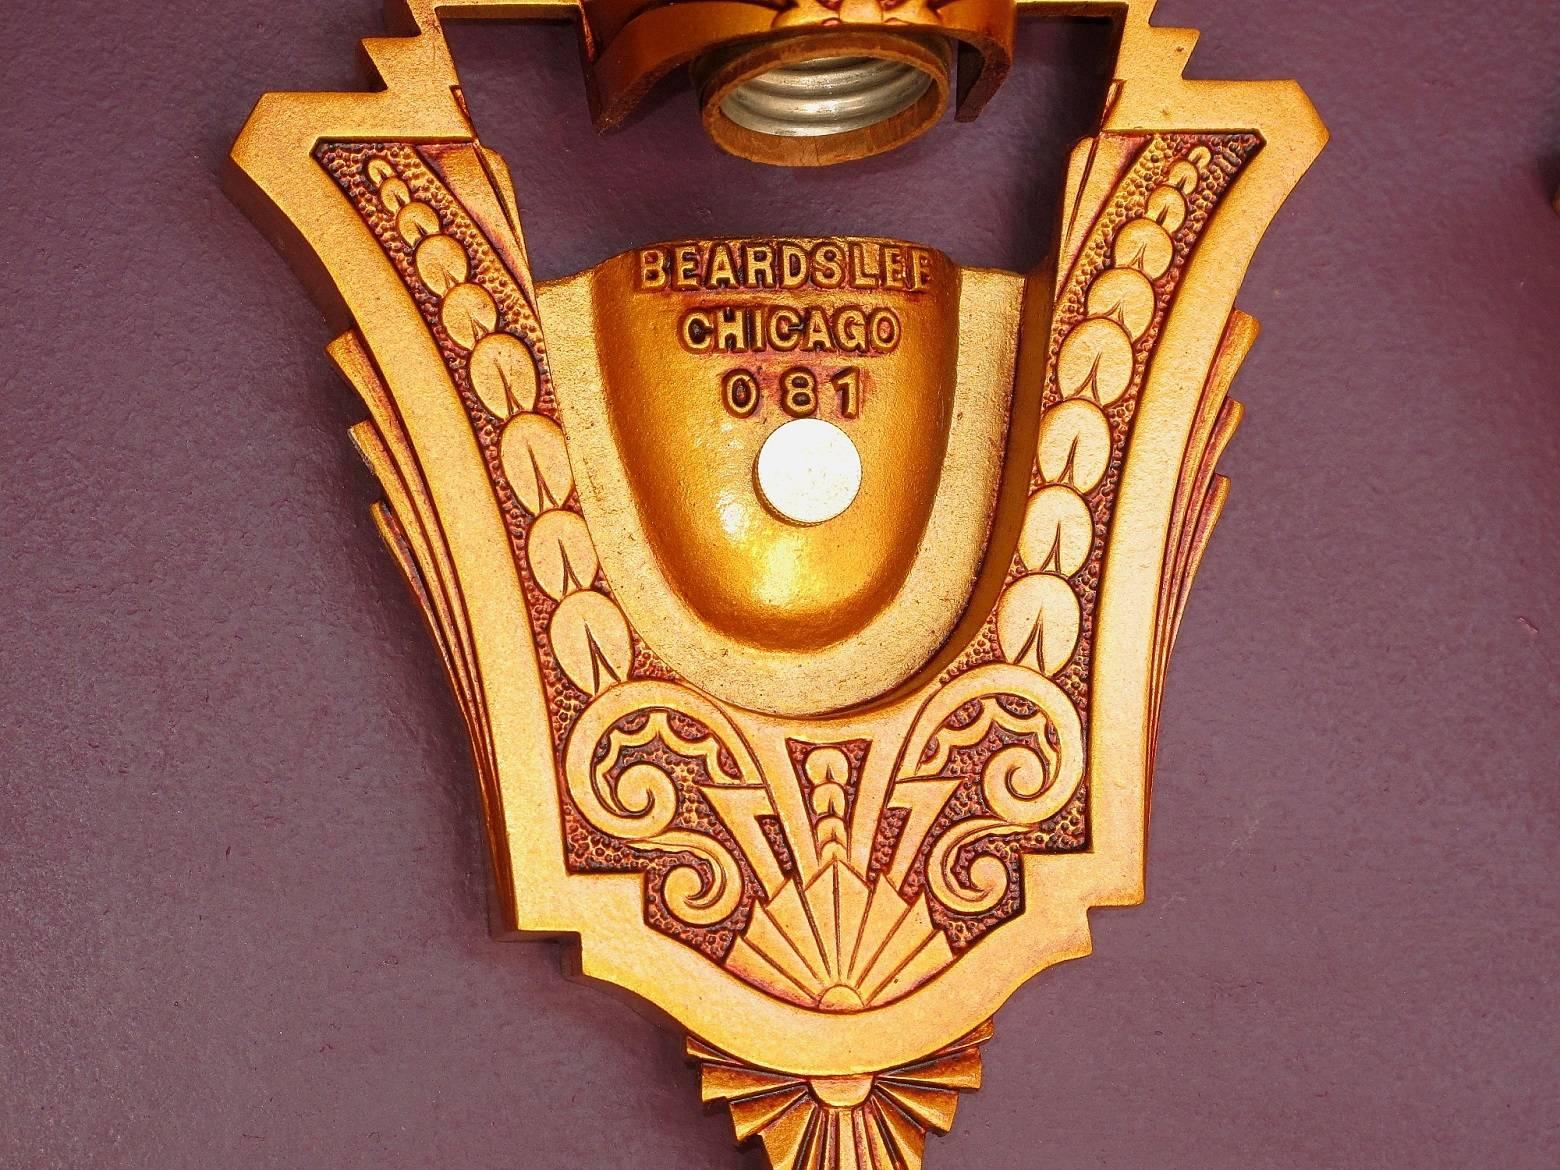 Pair of Beardslee Art Deco Slip Shade Sconces Warm Golden with Amber Shades In Excellent Condition For Sale In Prescott, AZ